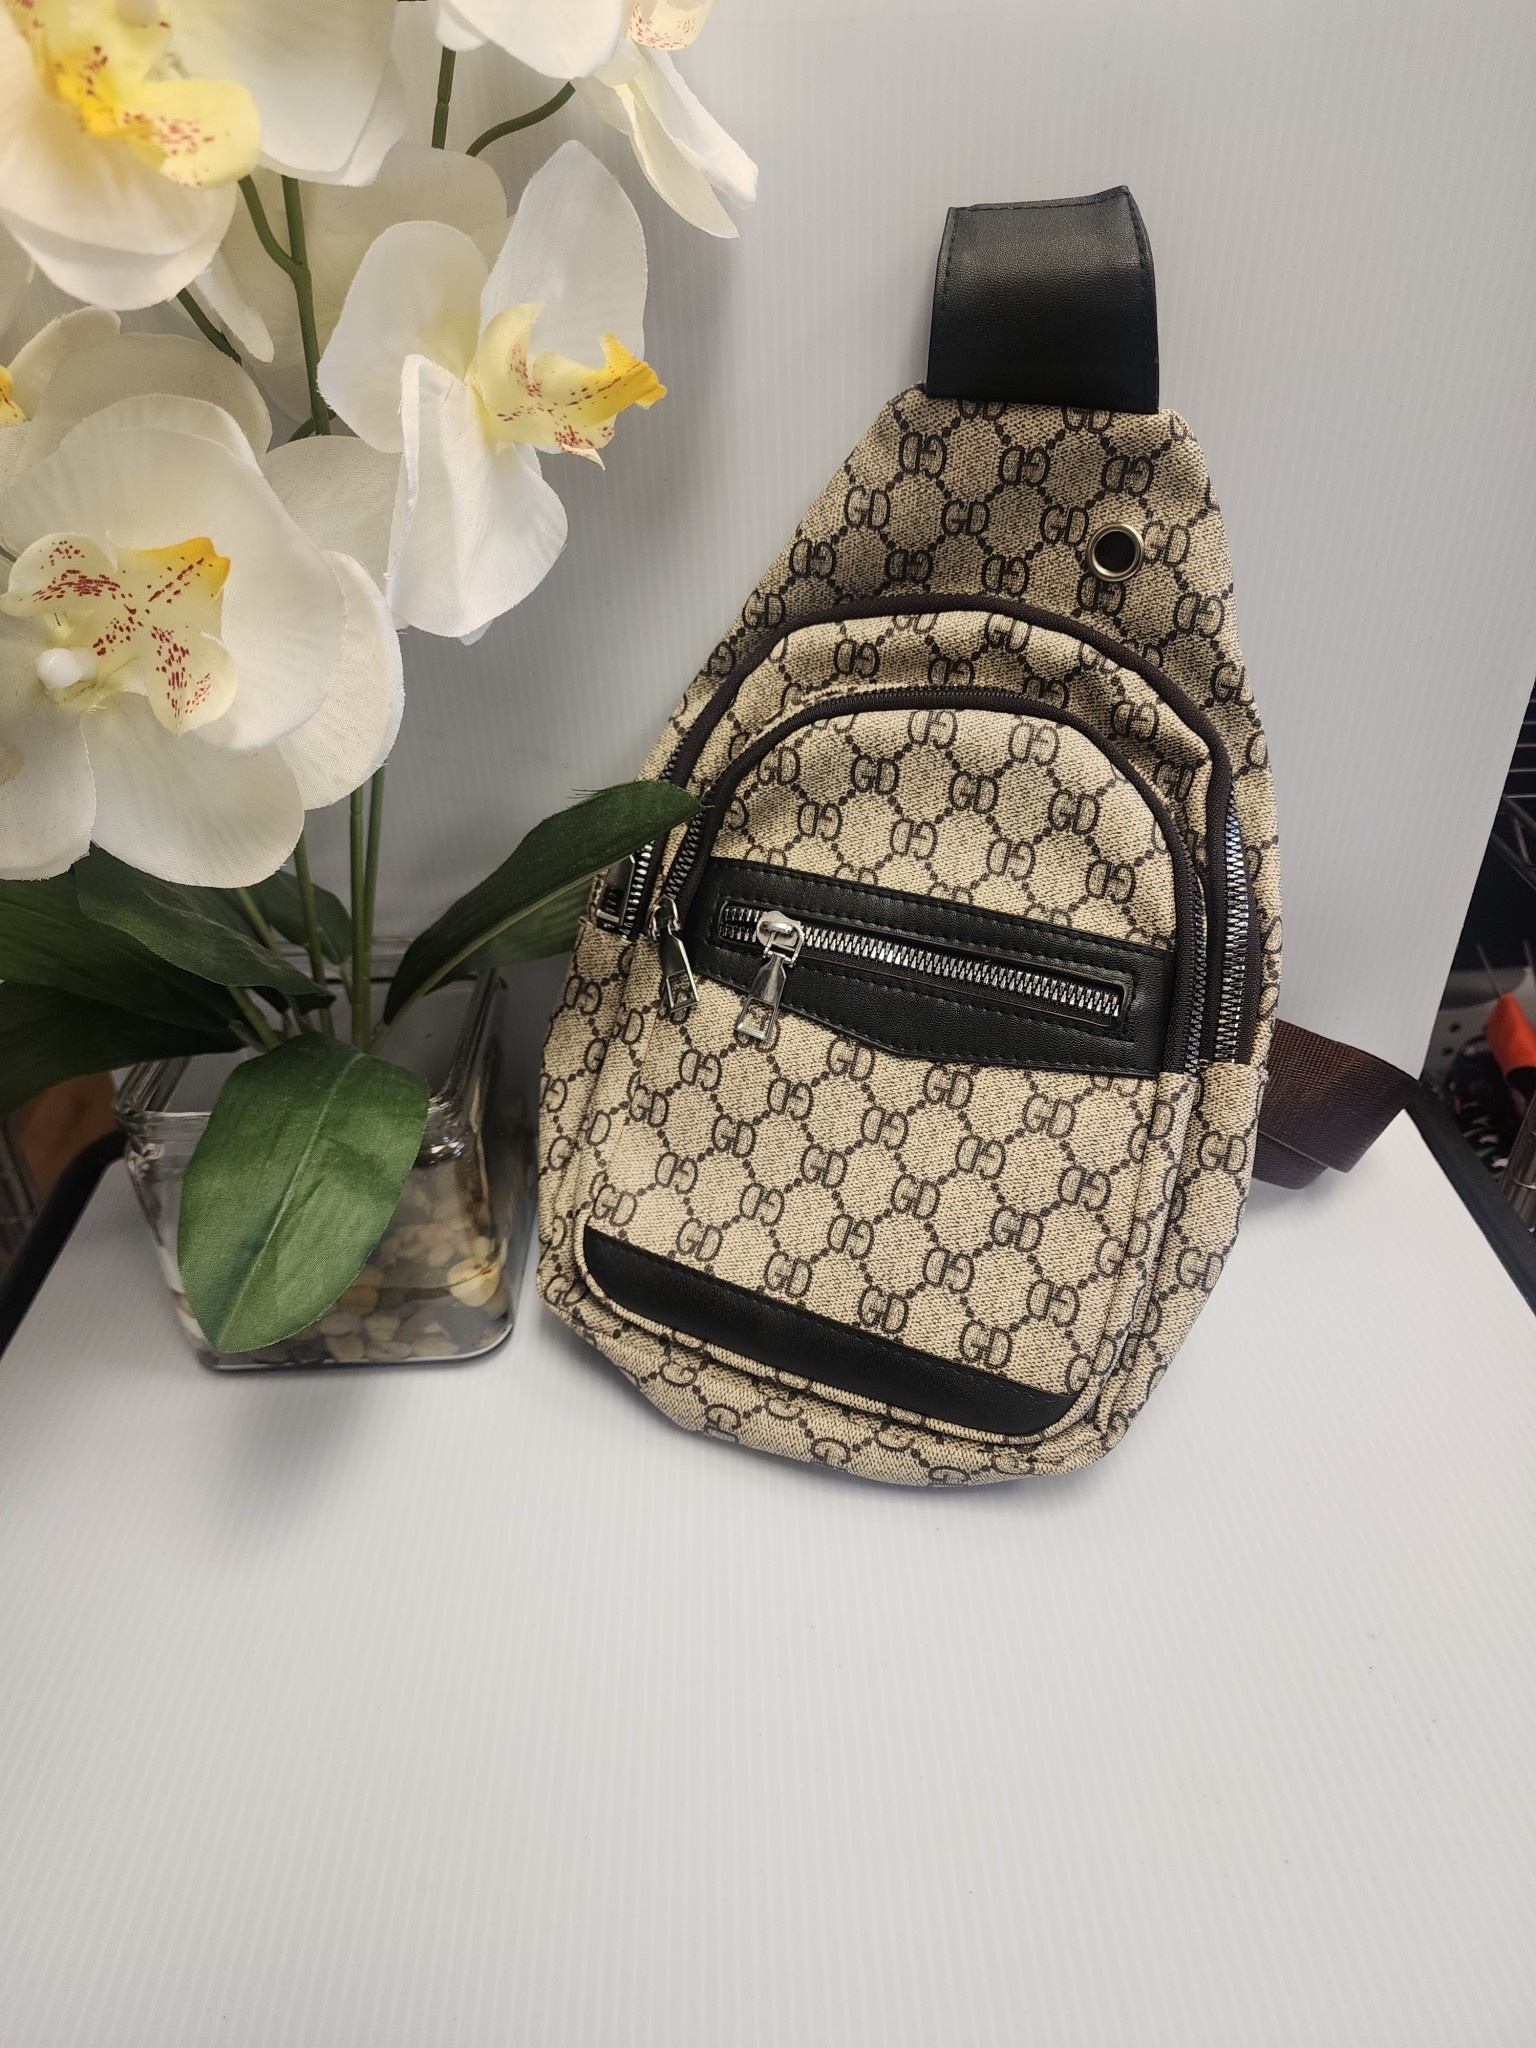 MaRey Fashion - GD SLING BAG Brand: Gucci inspired PHP... | Facebook